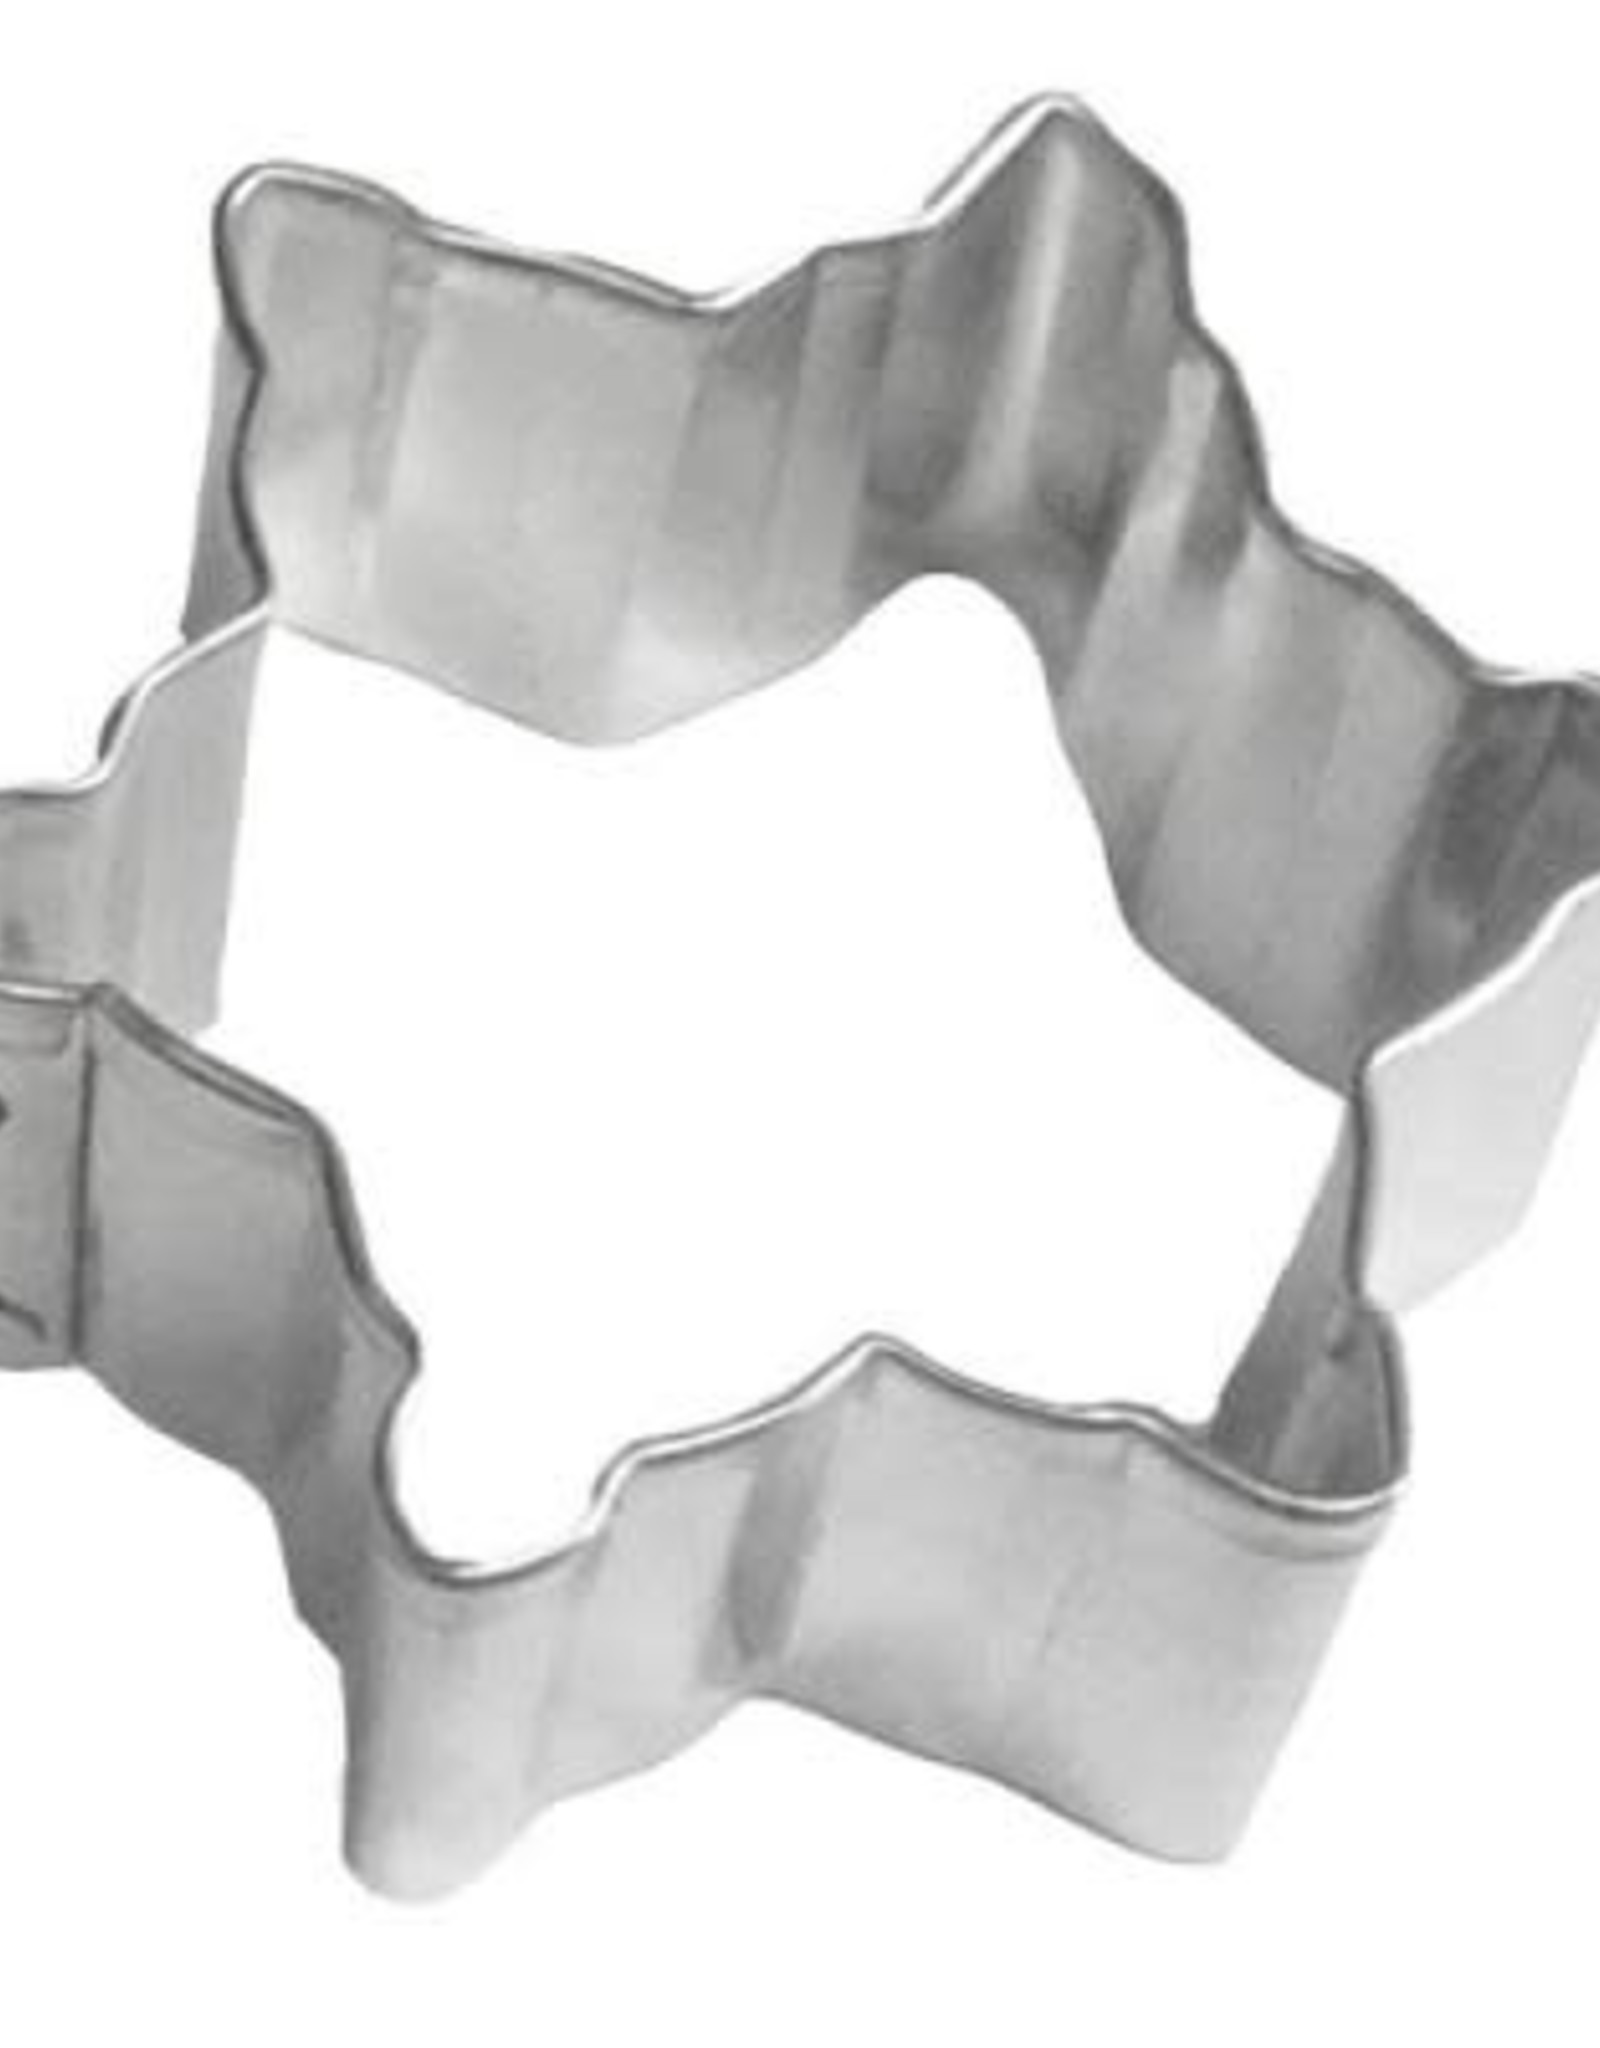 SNOWFLAKE Cookie Cutter (2-1/2")